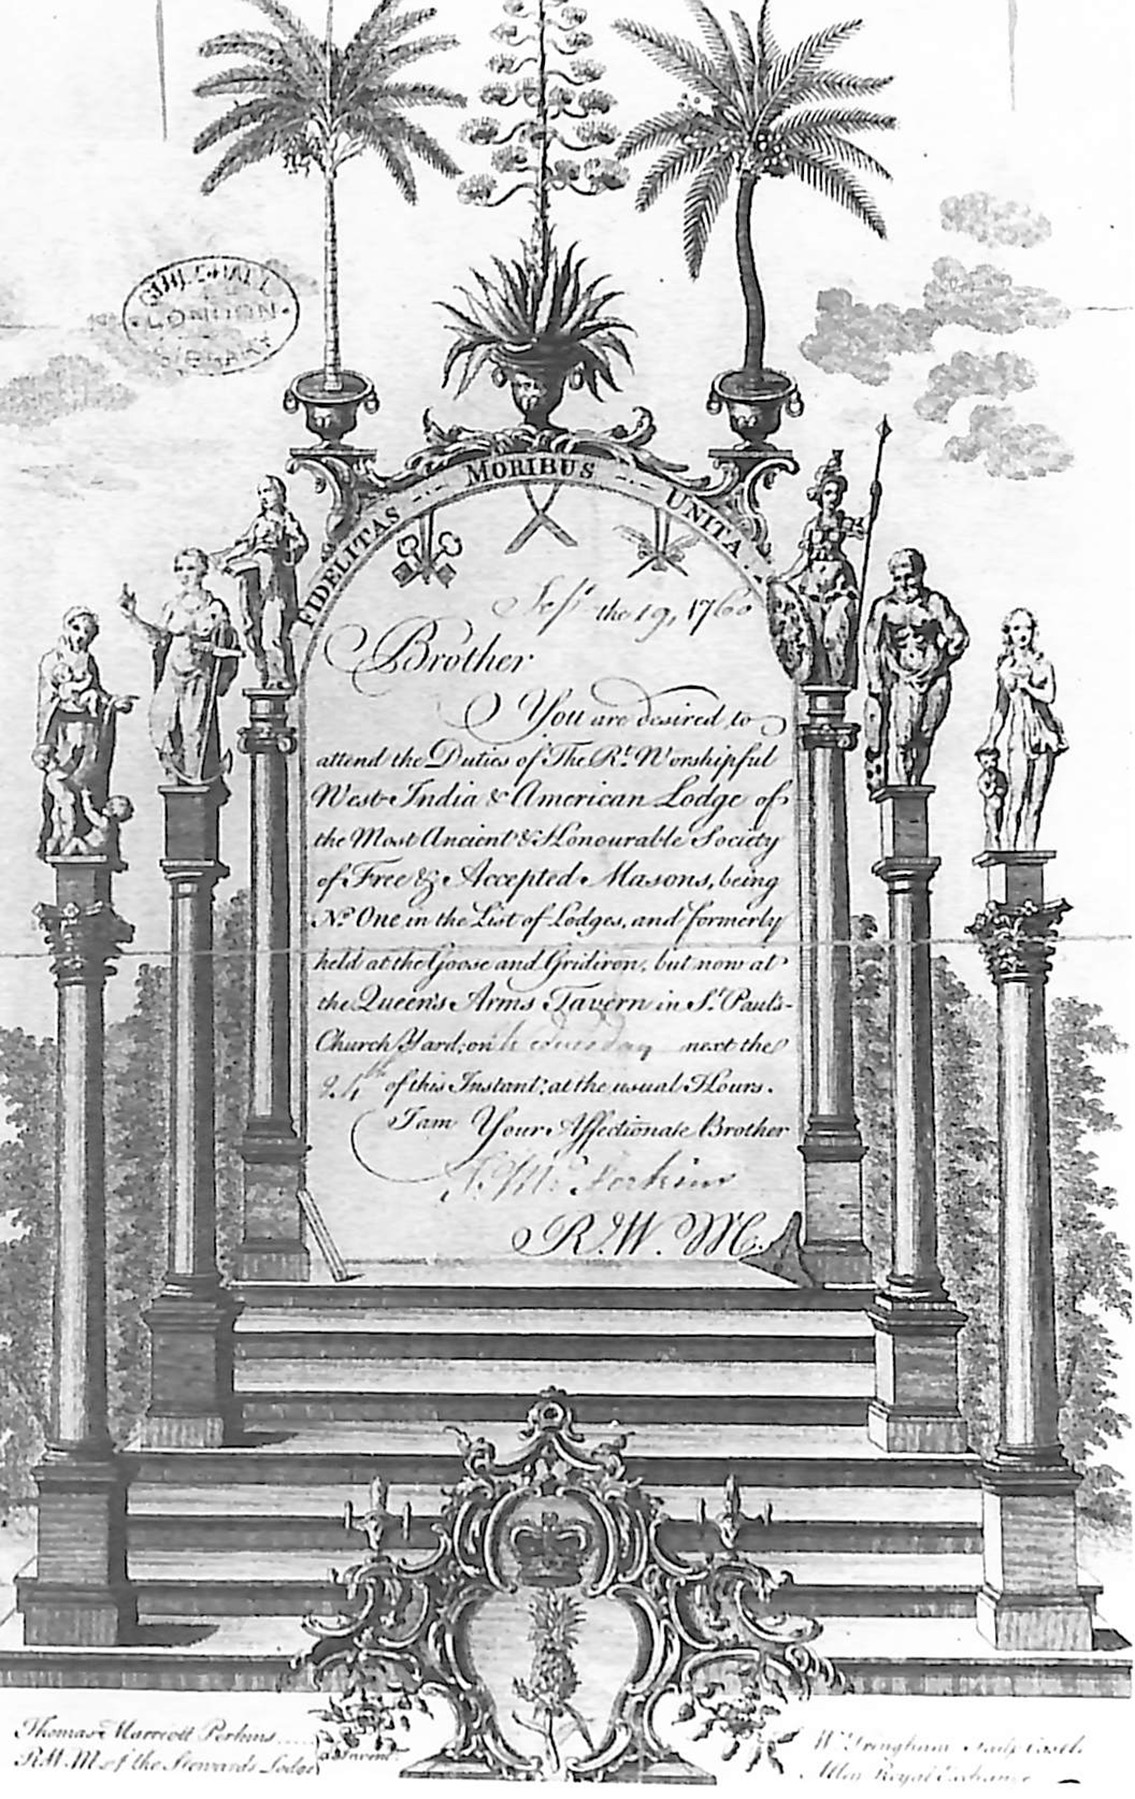 A summons to attend a Lodge, 1760